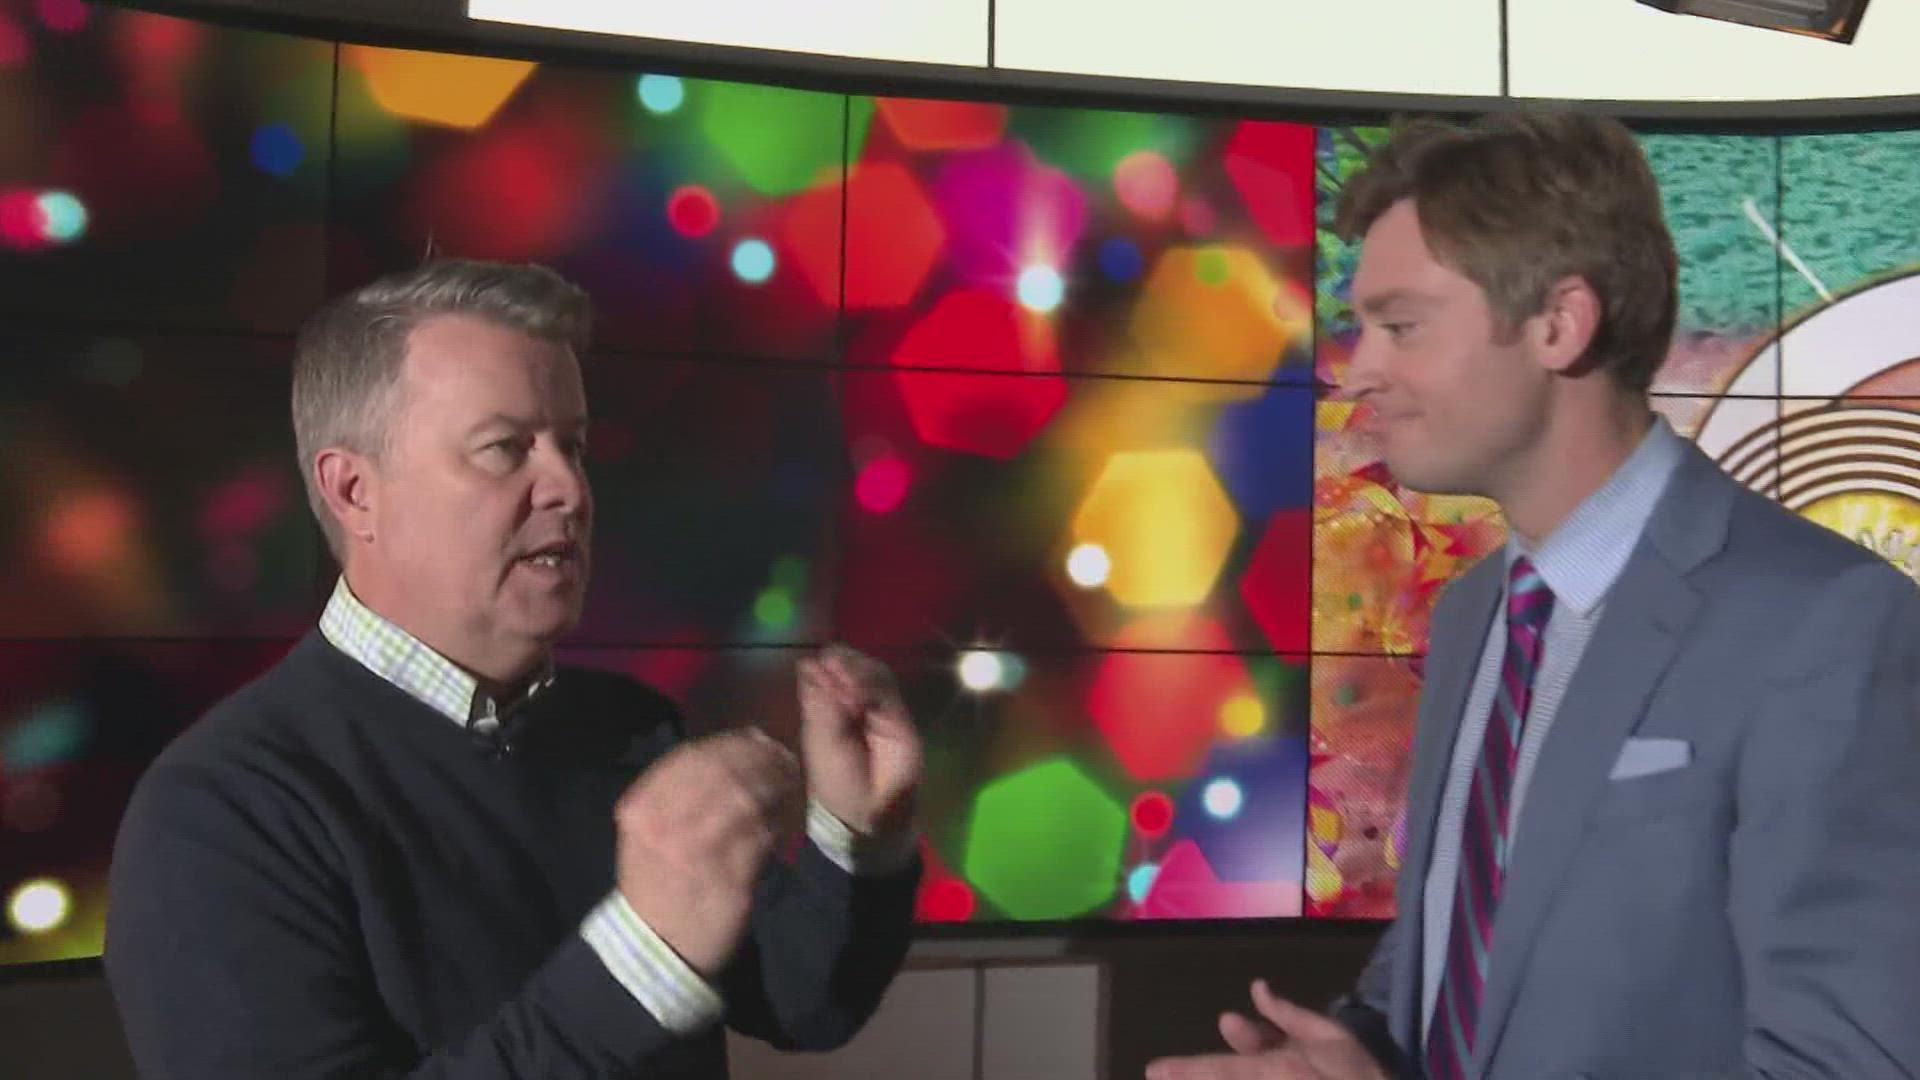 Eric Chilton takes you behind the scenes of the WFMY News 2 holiday promo shoot.